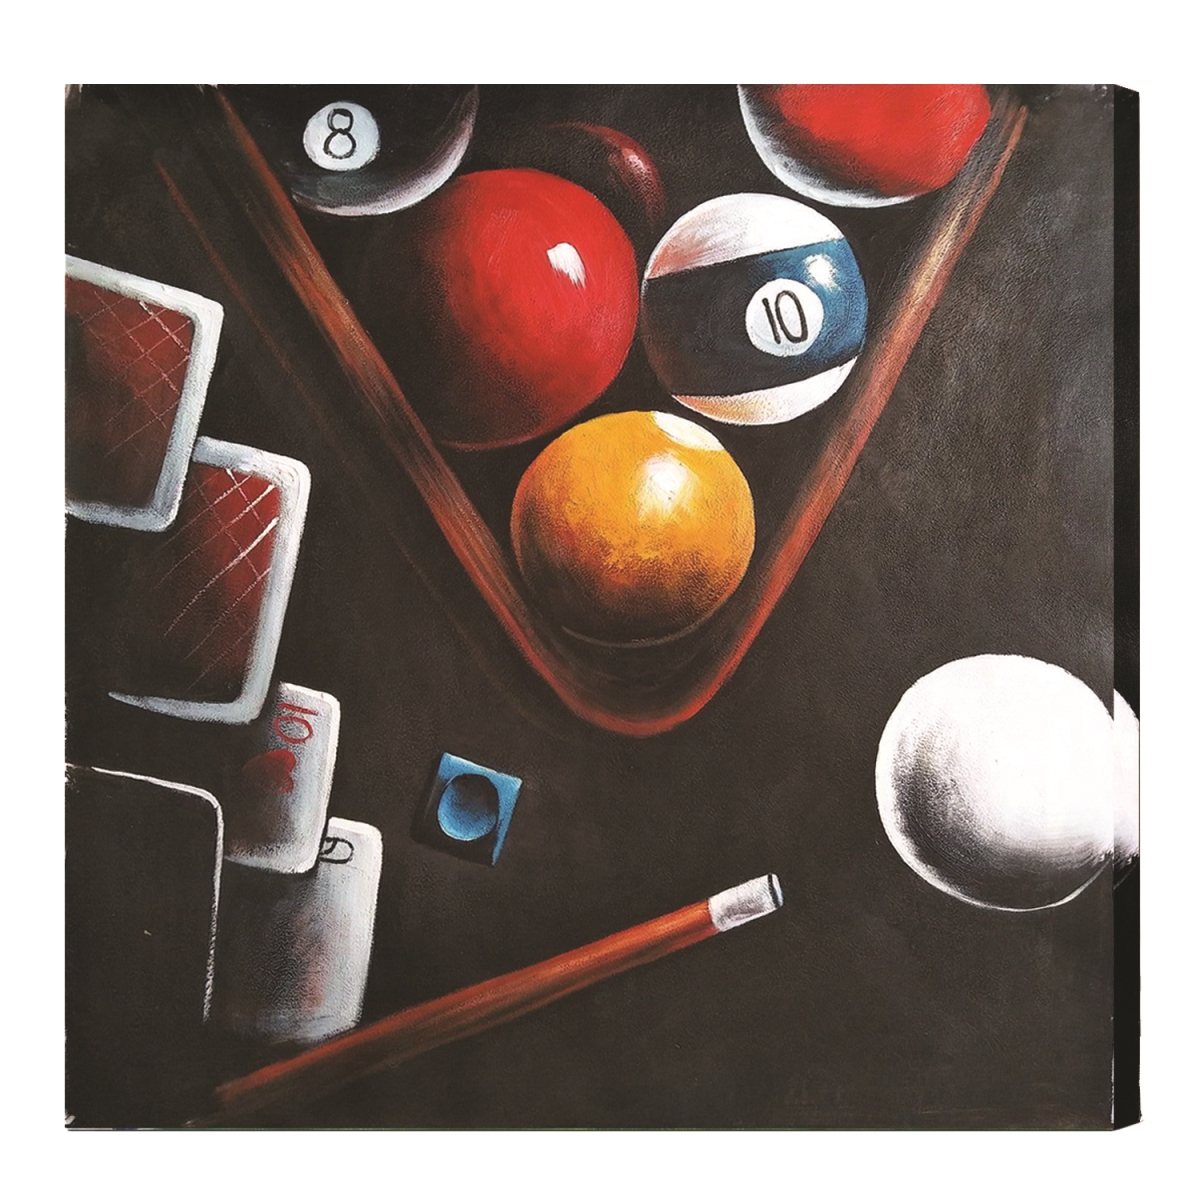 Picture of RAM Game Room OP1 24 x 24 in. Balls in Rack & Cue Oil Painting on Canvas